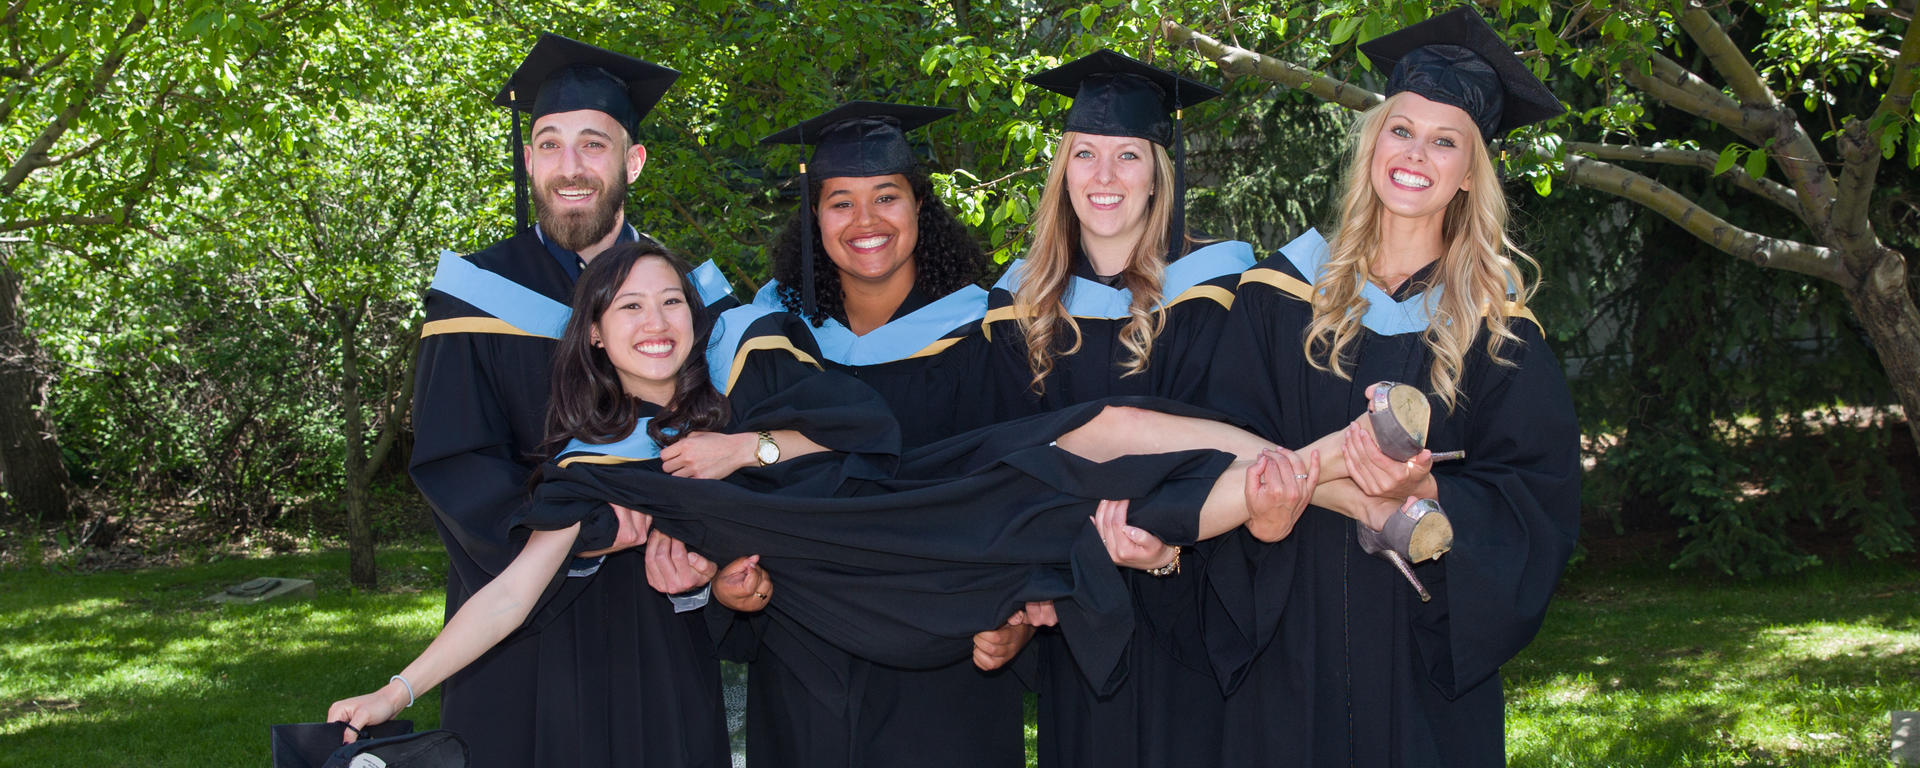 Five Werklund graduates wearing cap and gown pose for a photo on campus green space.